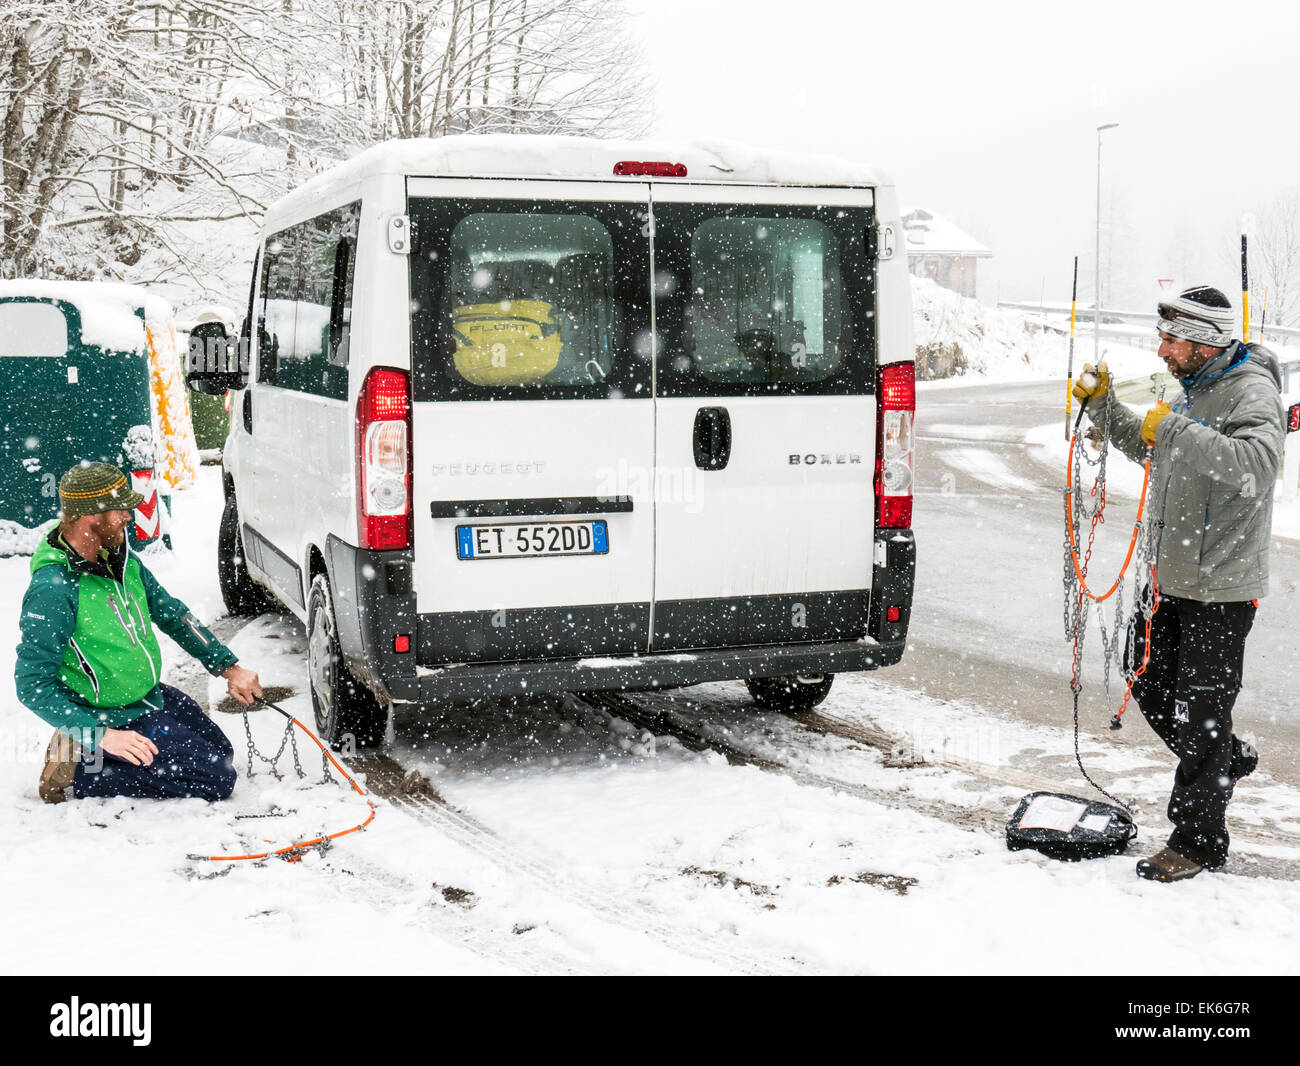 American skiers putting chains on a rental van, Dolomite Mountains, northern Italy Stock Photo